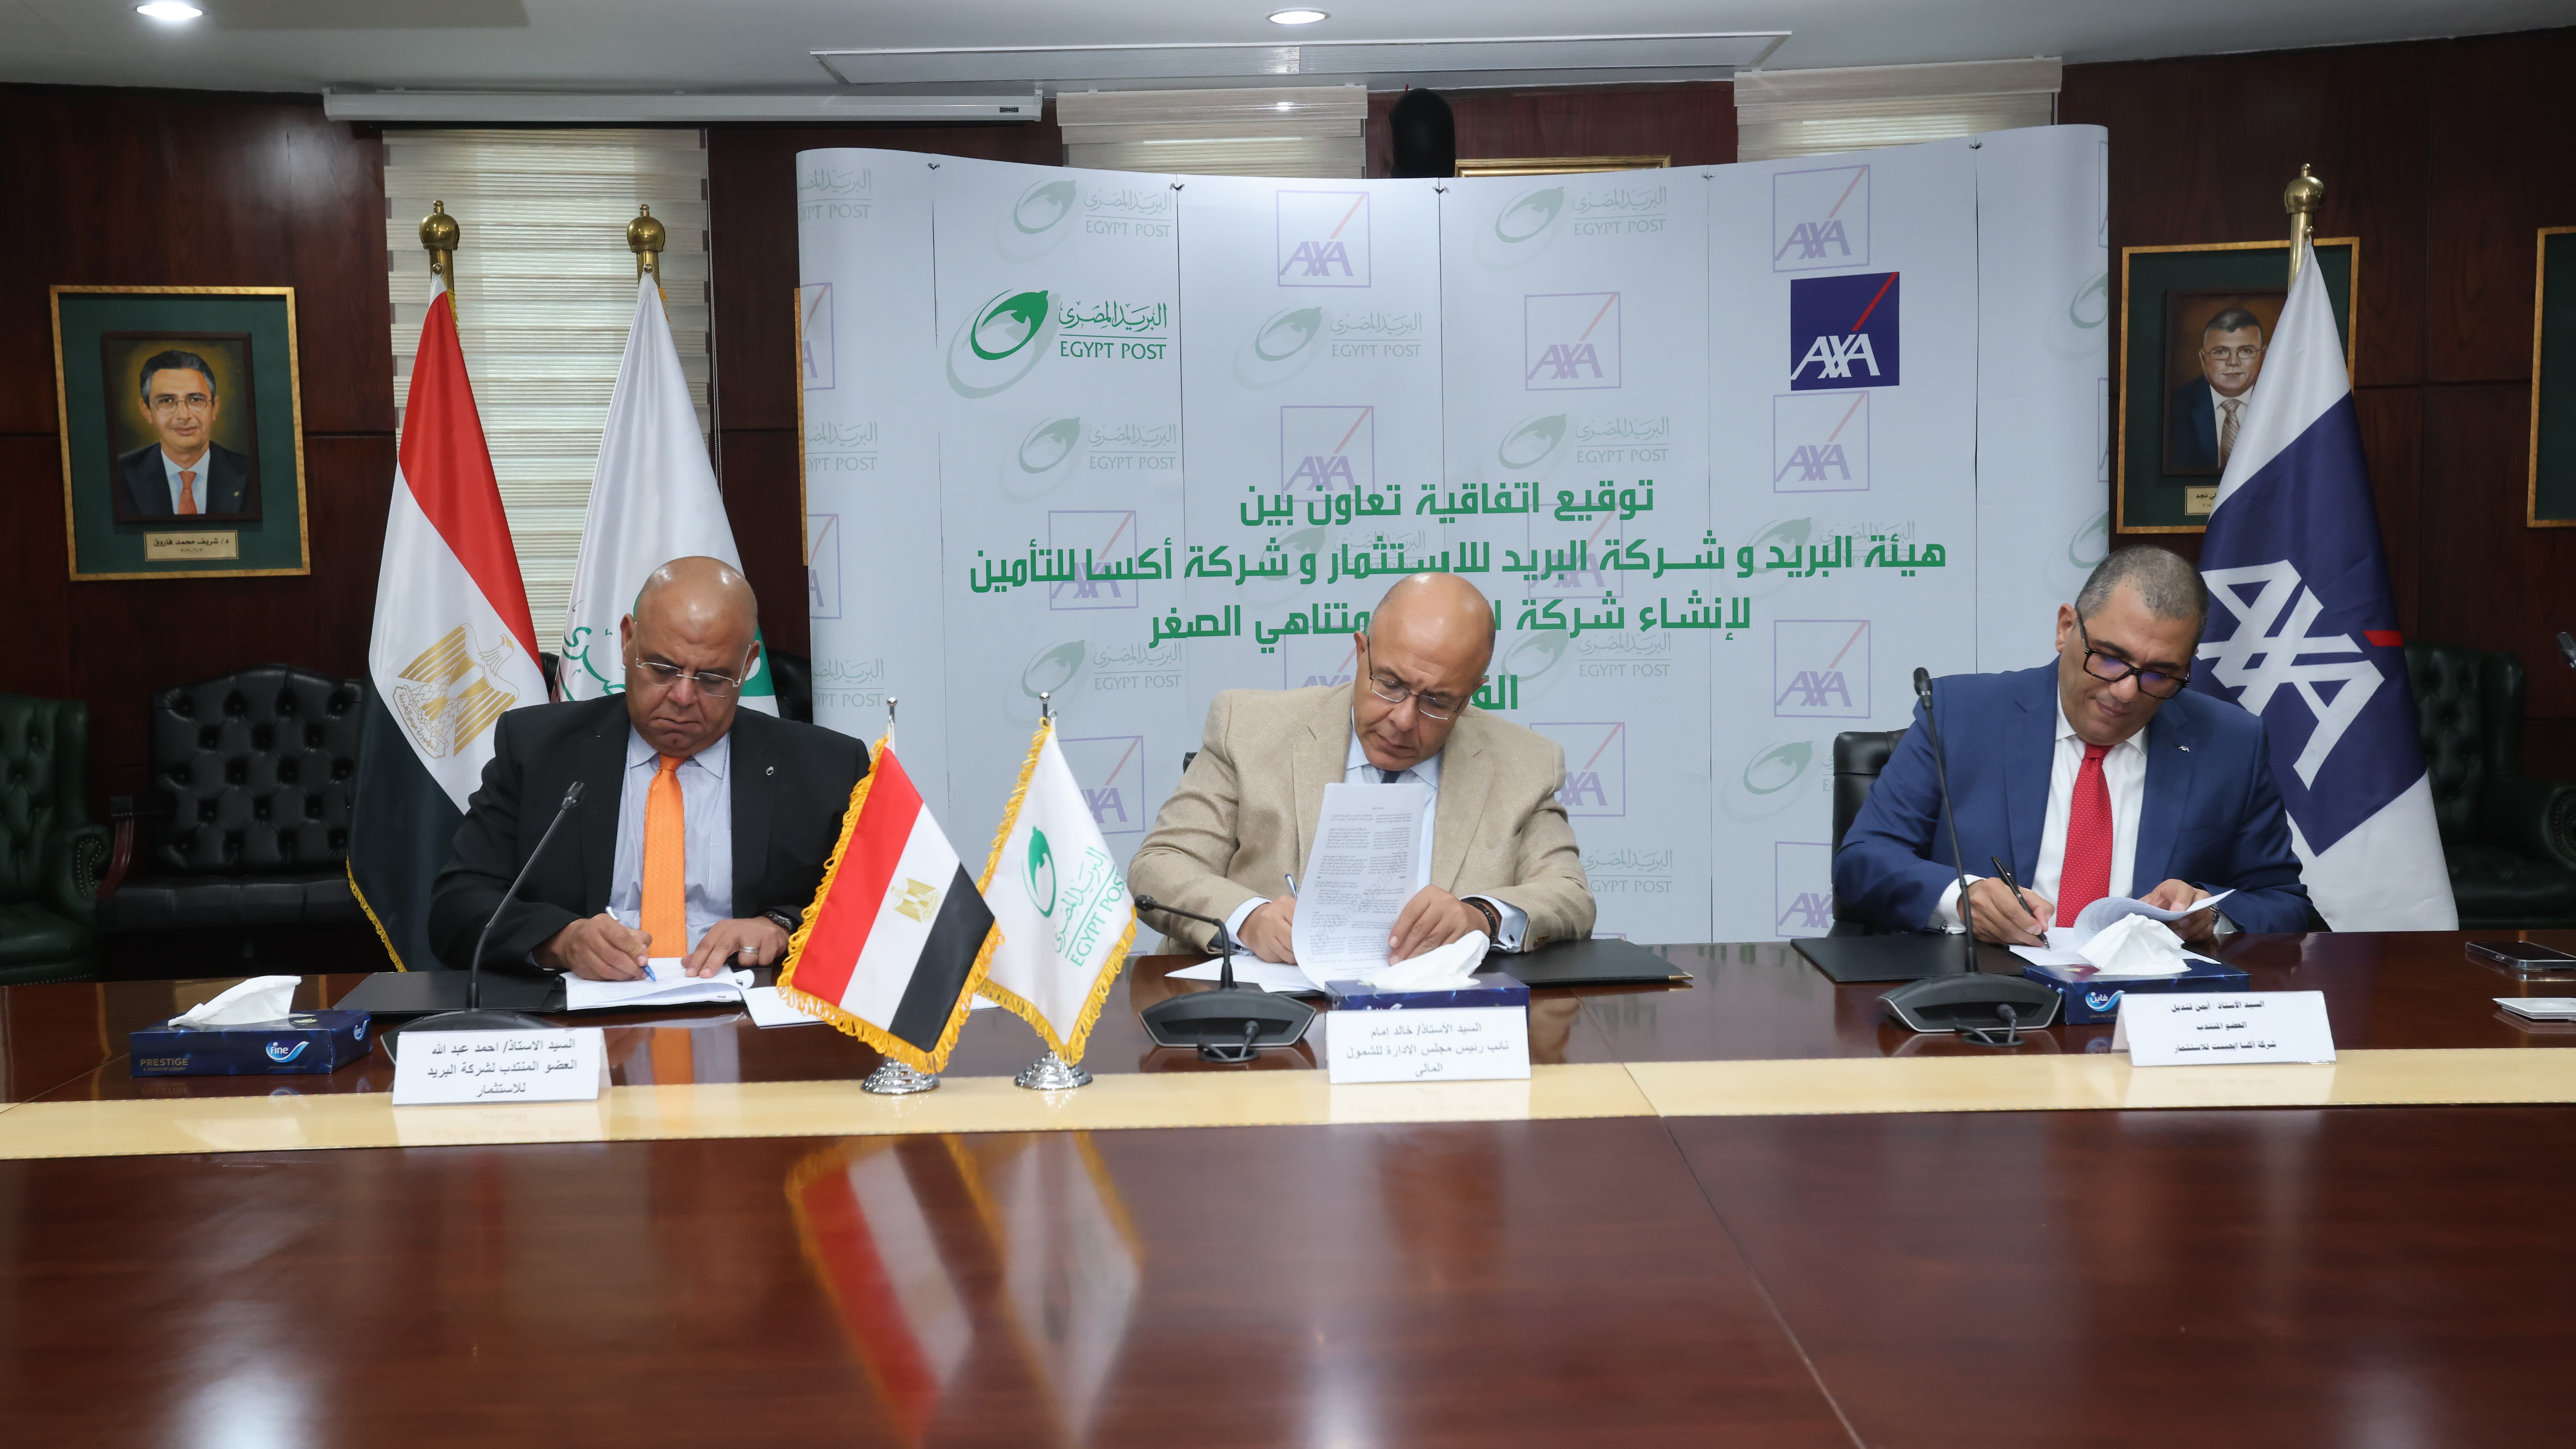 AXA Group inks a cooperation agreement with Egypt Post and Post for Investment to establish a micro-insurance firm